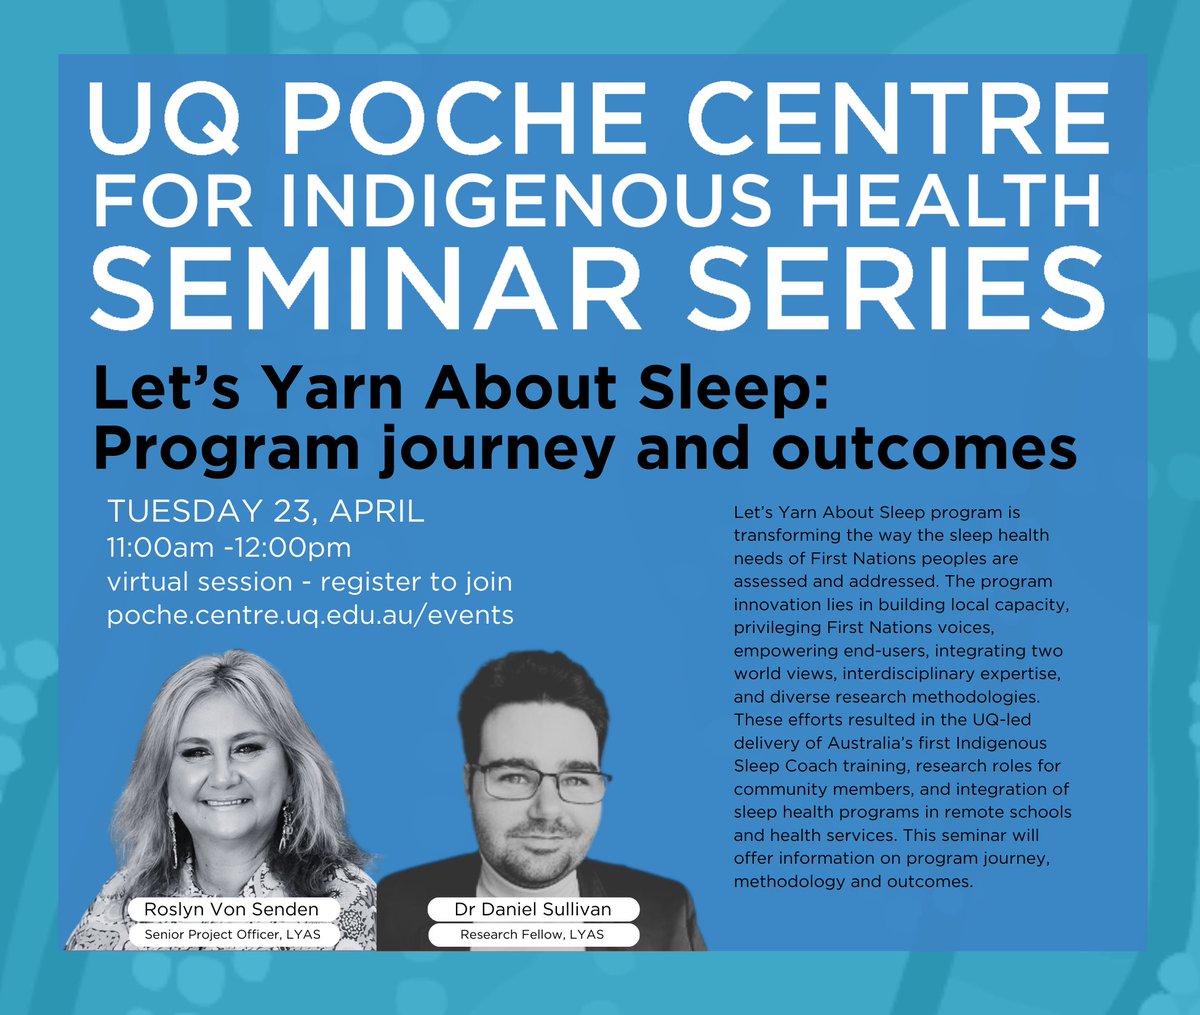 Join us next week for a Seminar Series with Roslyn Von Senden and Dr Daniel Sullivan on the @yarn_abt_sleep program, Australia’s first-ever sleep health program for First Nations Peoples. Visit our website to register and learn more 🔗poche.centre.uq.edu.au/events